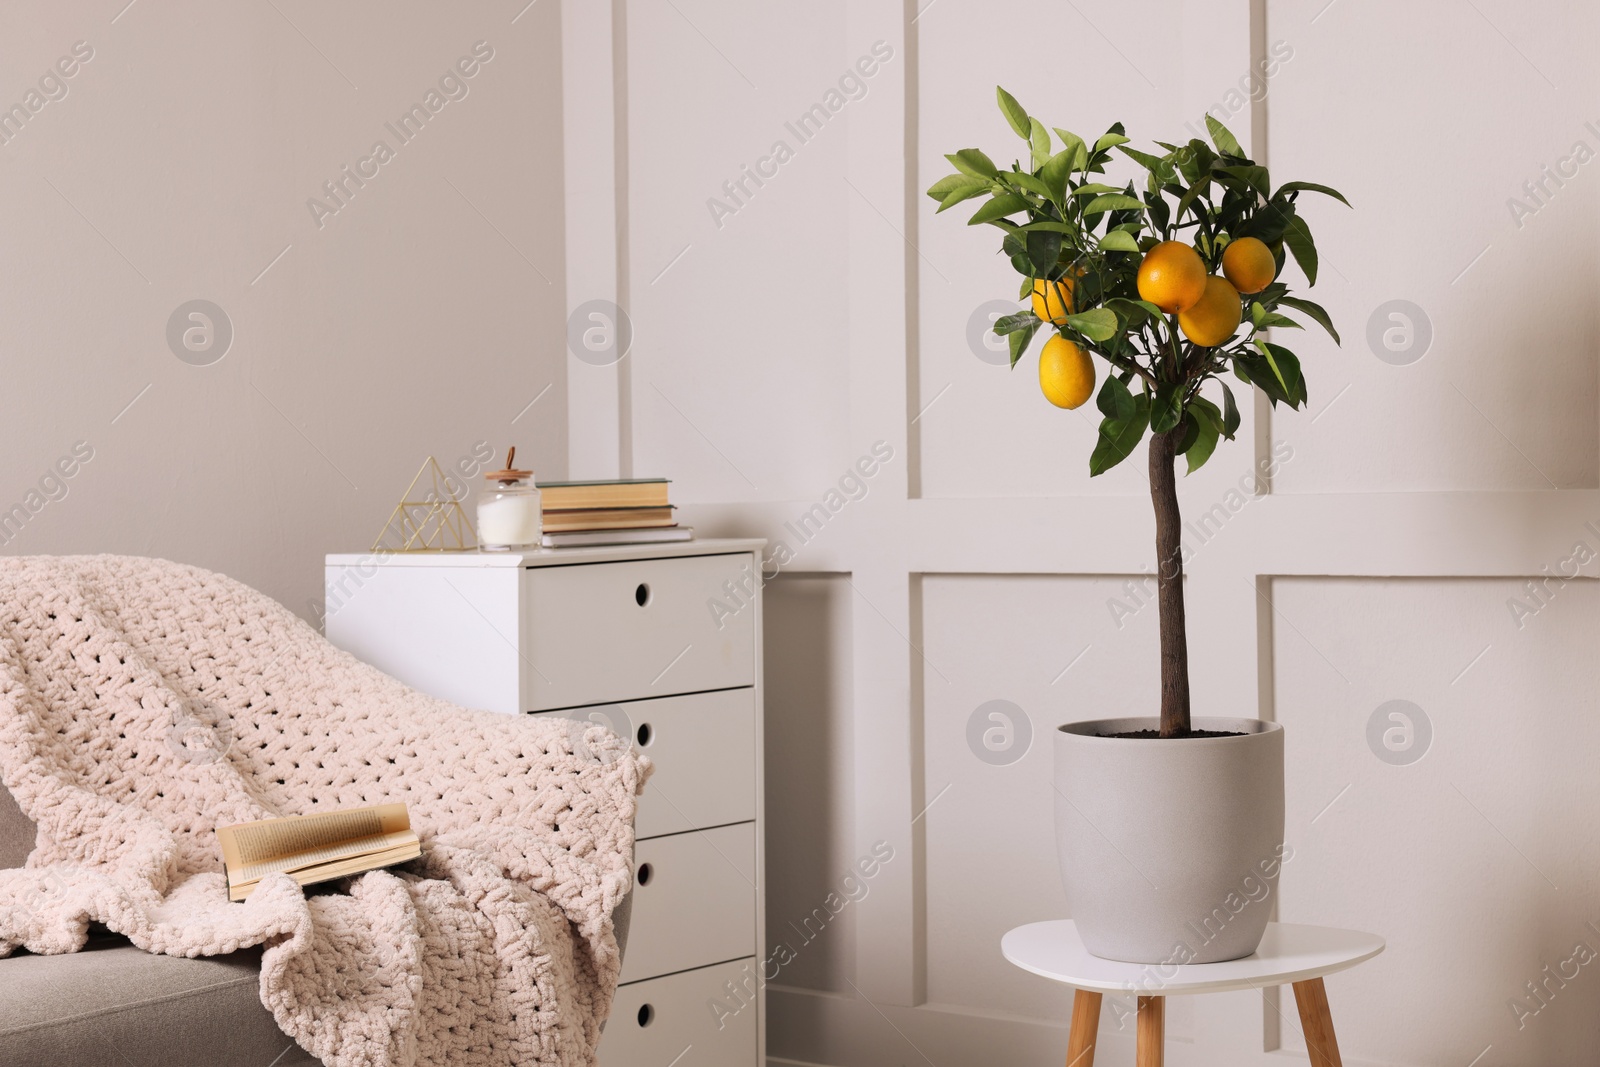 Photo of Idea for minimalist interior design. Small potted lemon tree with fruits on table in living room